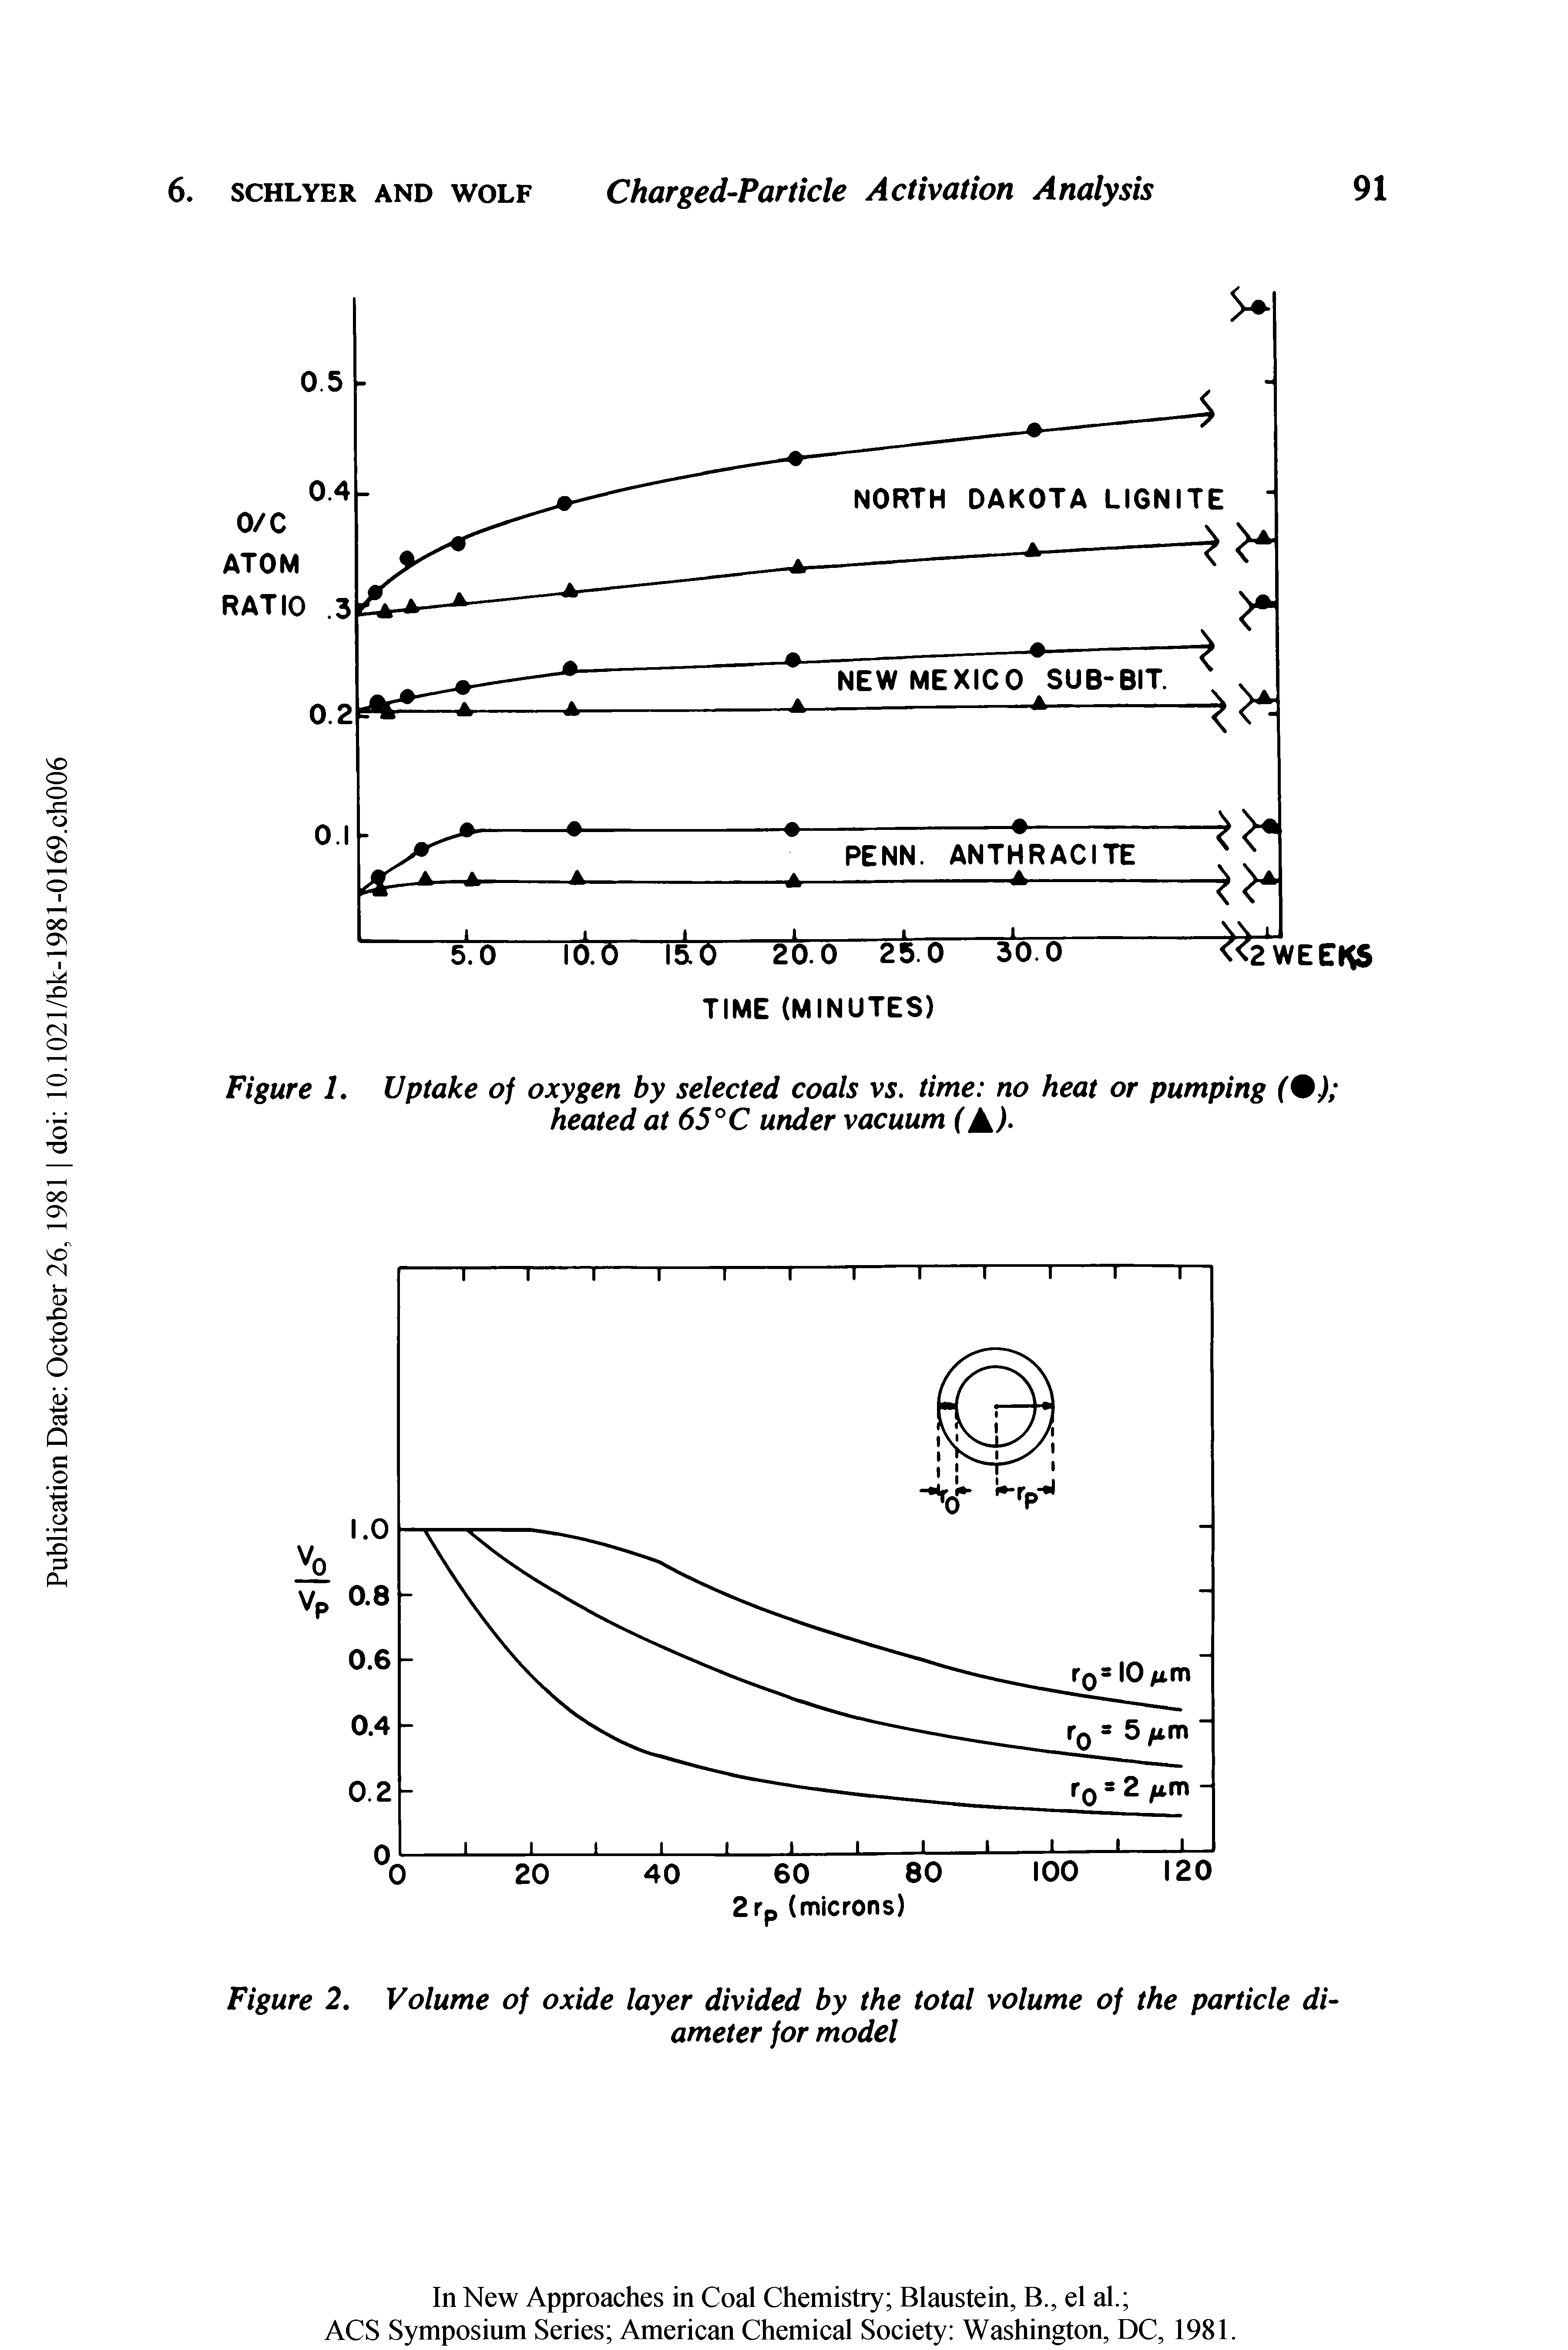 Figure L Uptake of oxygen by selected coals vs. time no heat or pumping (%) heated at 65° C under vacuum ( ).